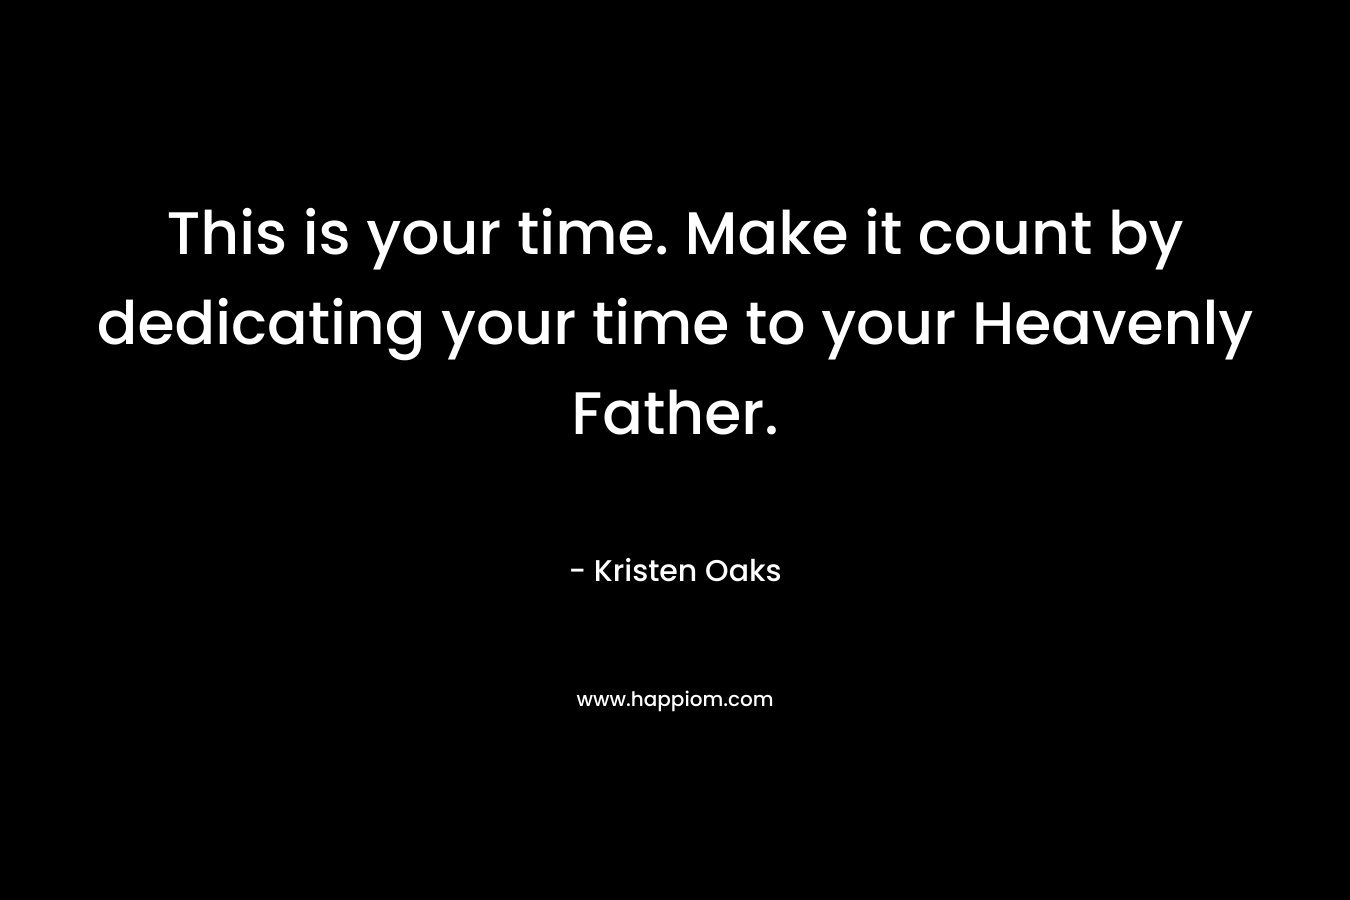 This is your time. Make it count by dedicating your time to your Heavenly Father.